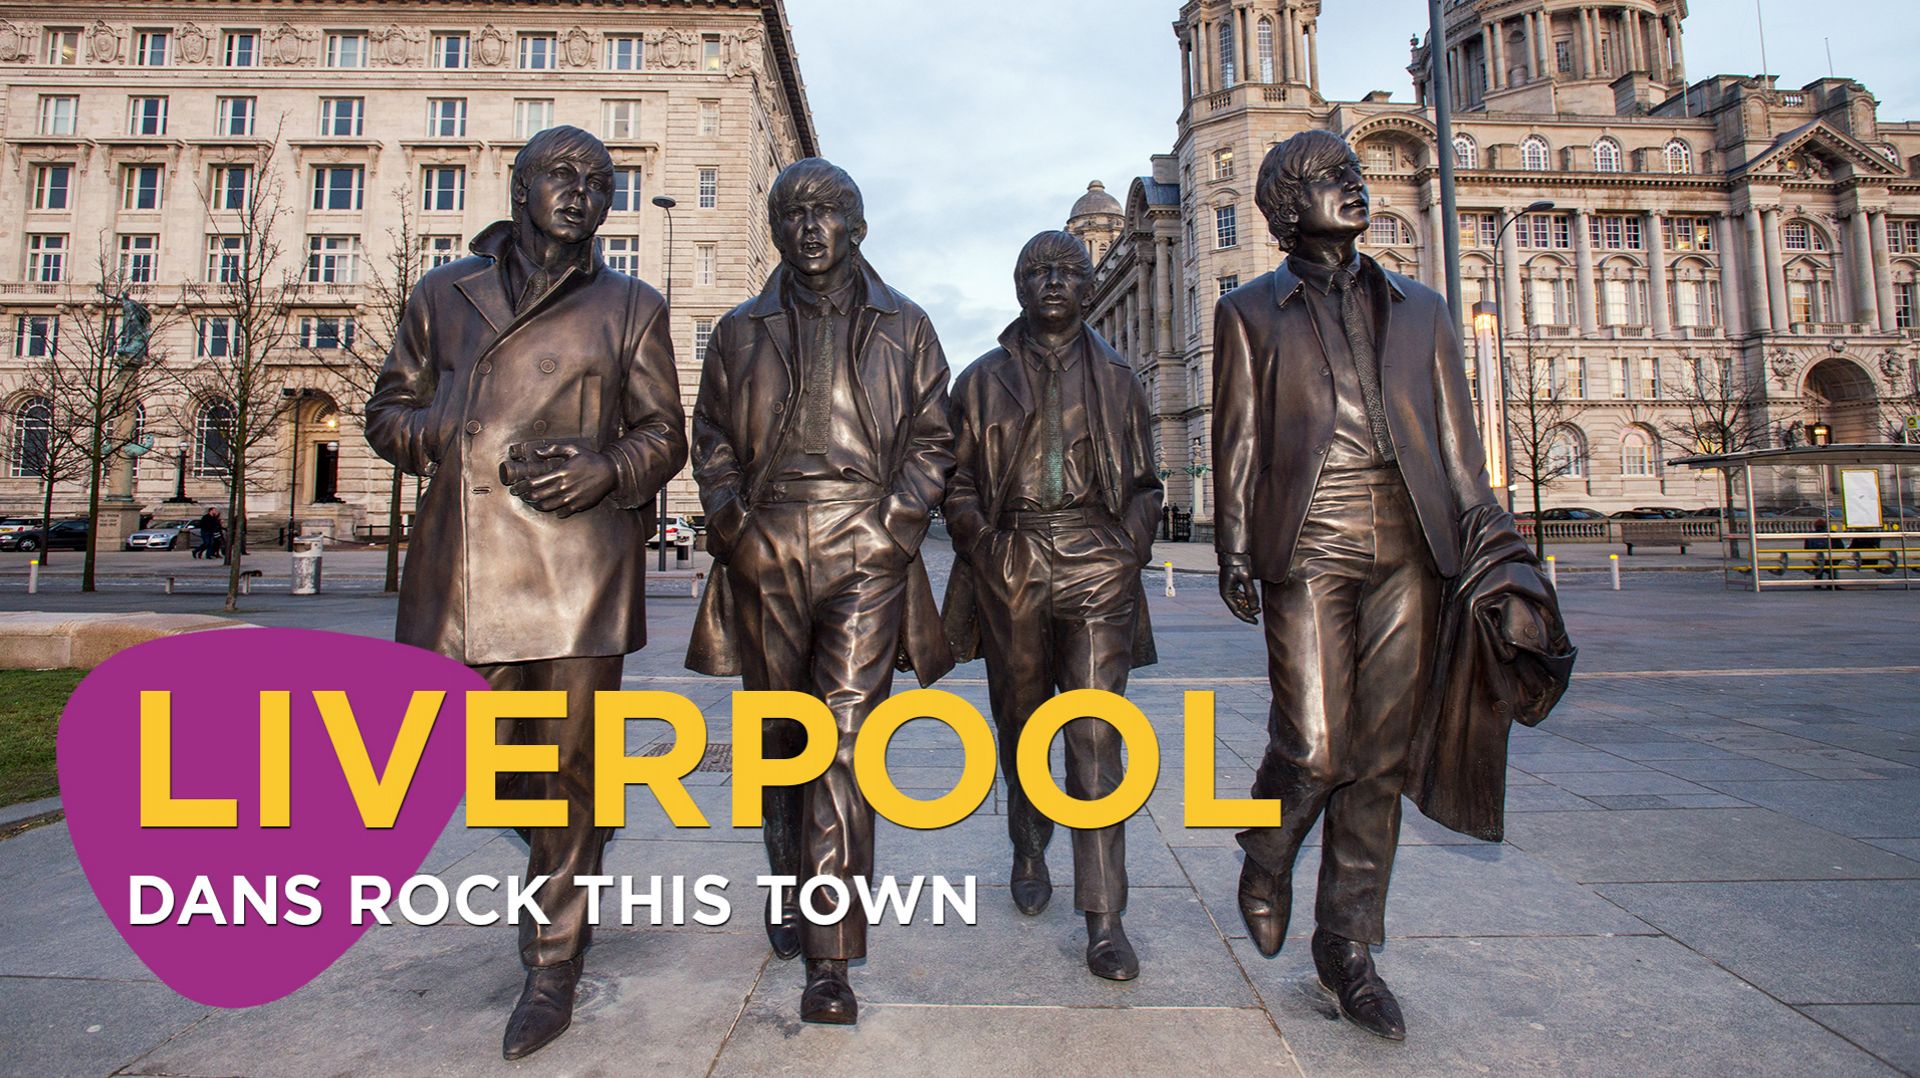 rock-this-town-liverpool